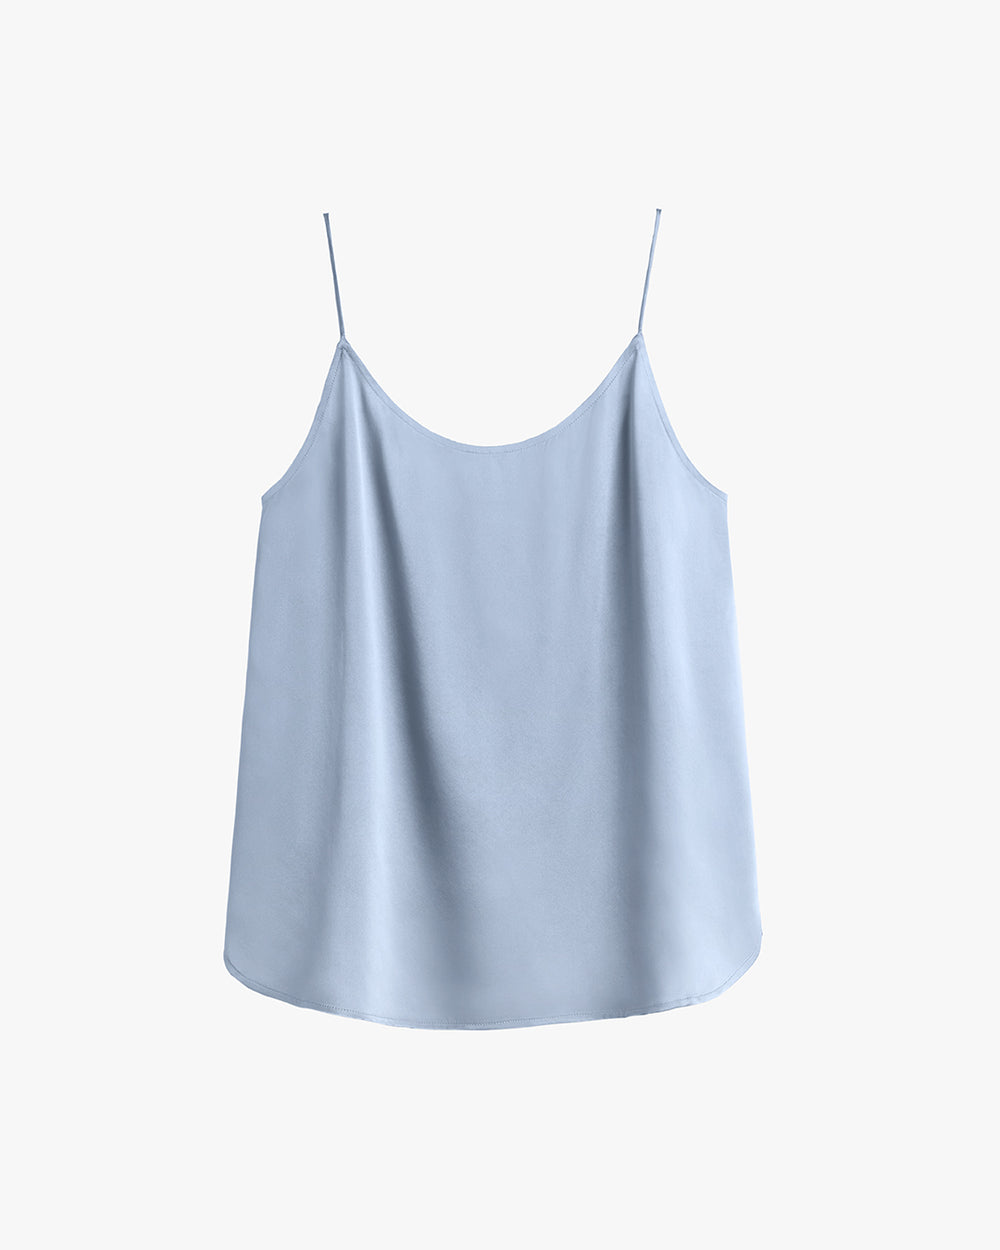 Sleeveless top with thin straps displayed against a plain background